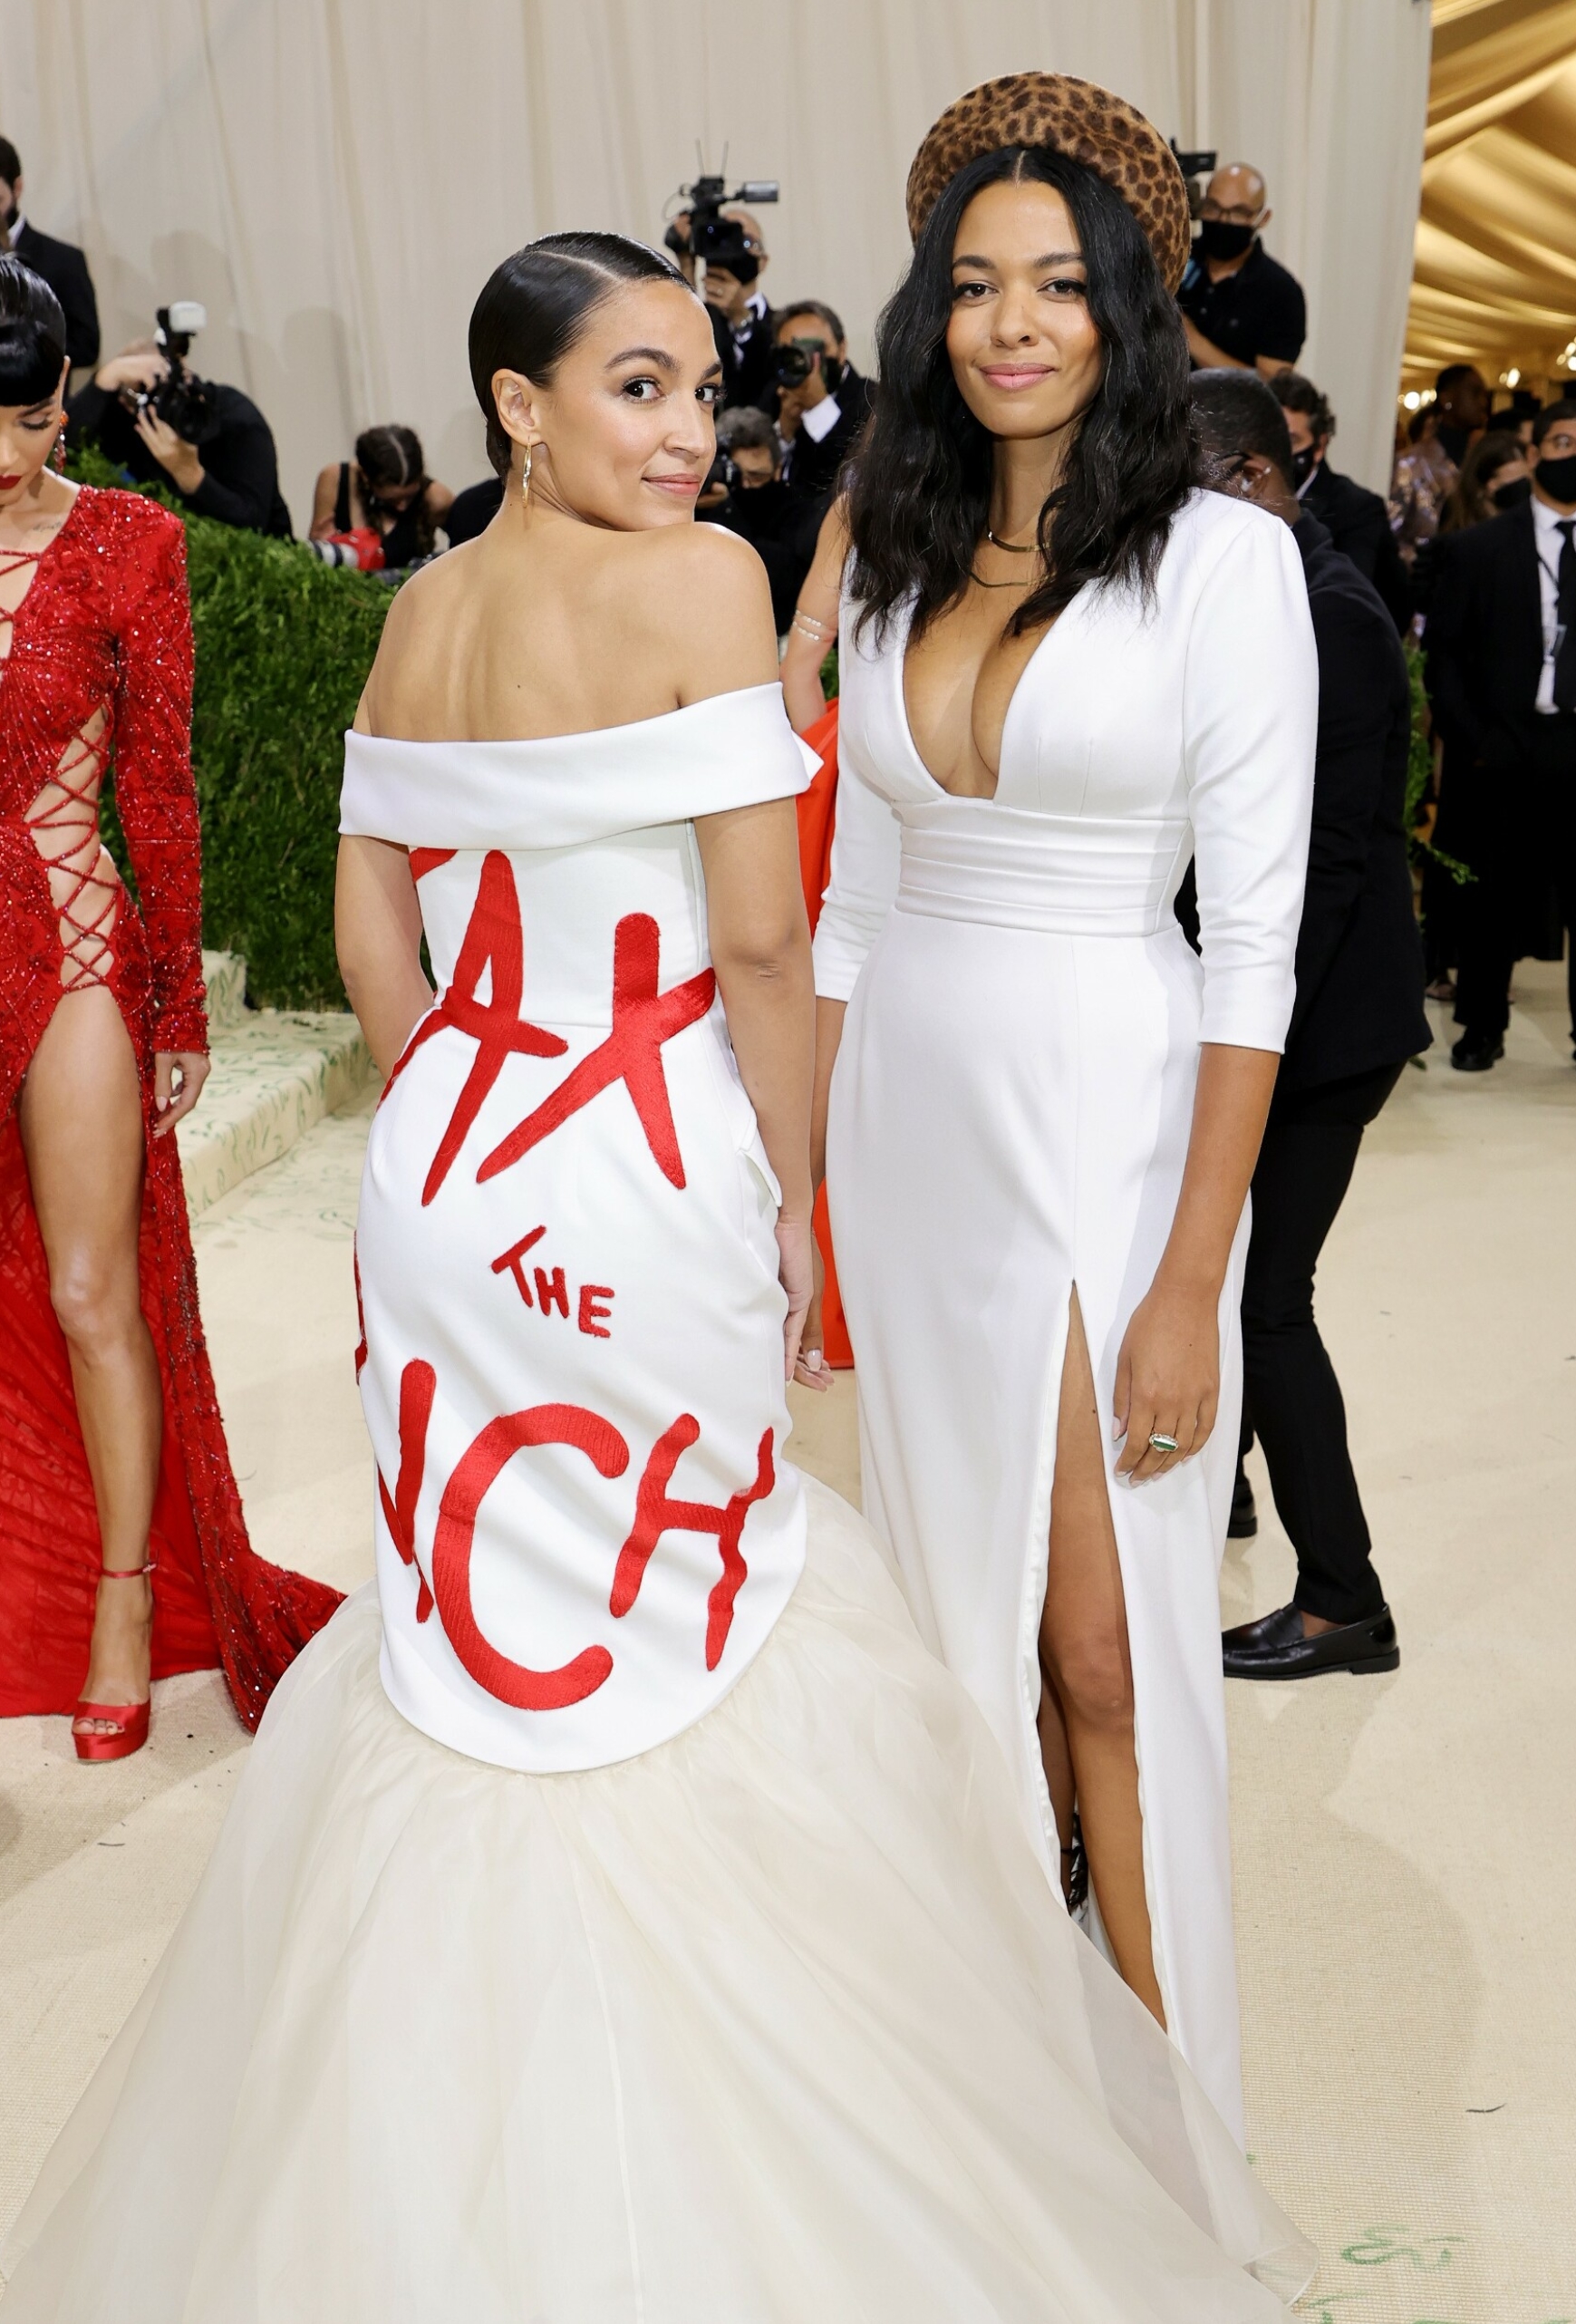 DO LIKE MORTHA: US politician Alexandria Ocasio-Cortez at this year's MET gala picked up a dress with the caption 